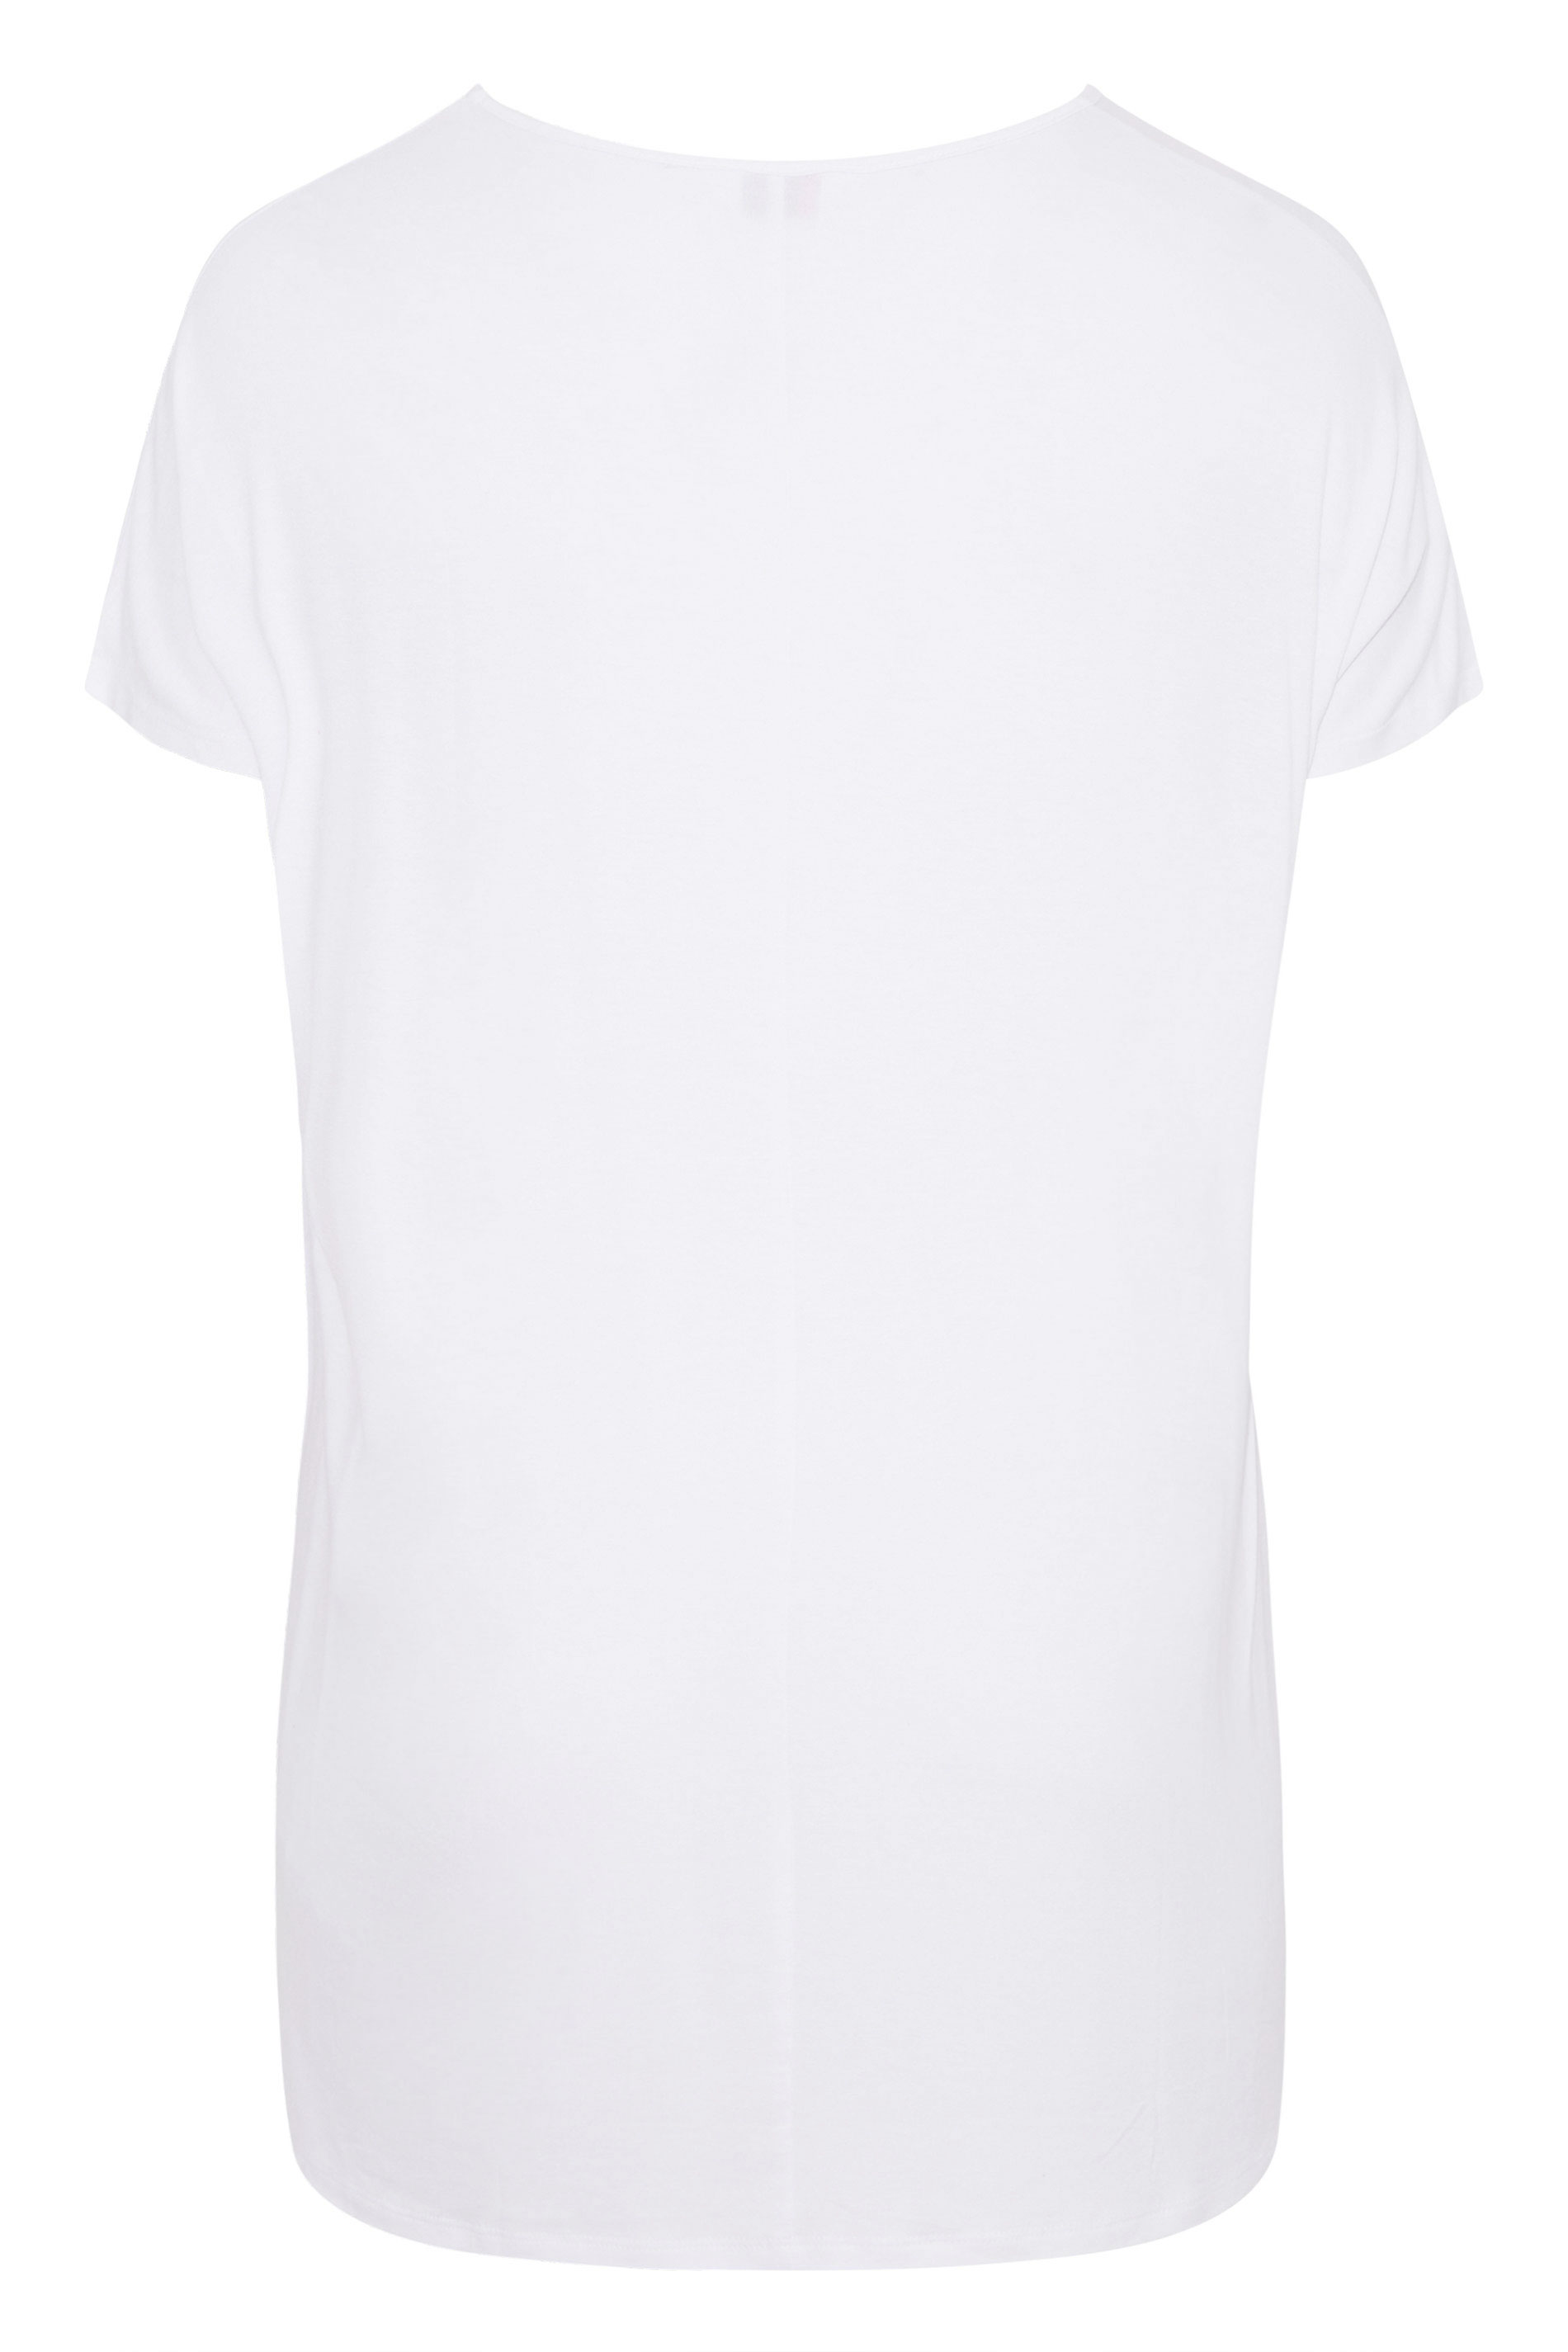 Grande taille  Tops Grande taille  T-Shirts | T-Shirt Blanc Manches Courtes Jersey - LY69814